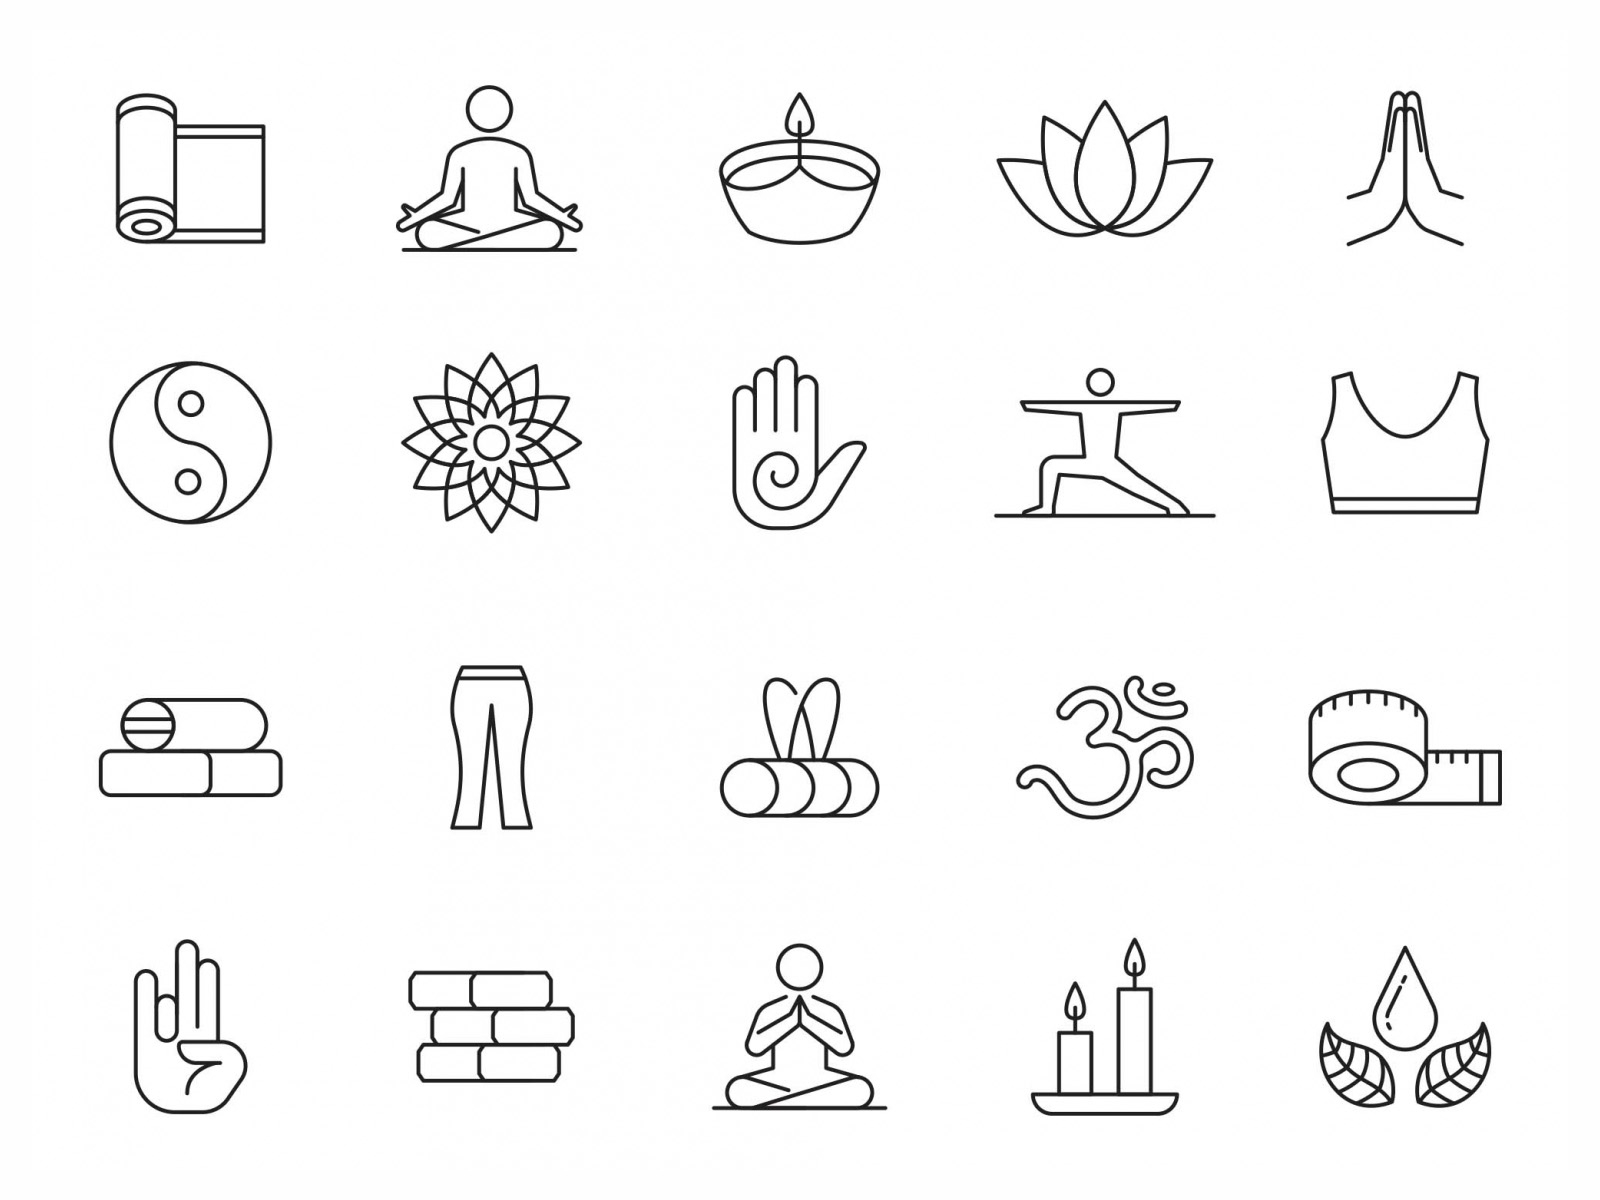 20 Yoga Vector Icons by Graphic Pear on Dribbble